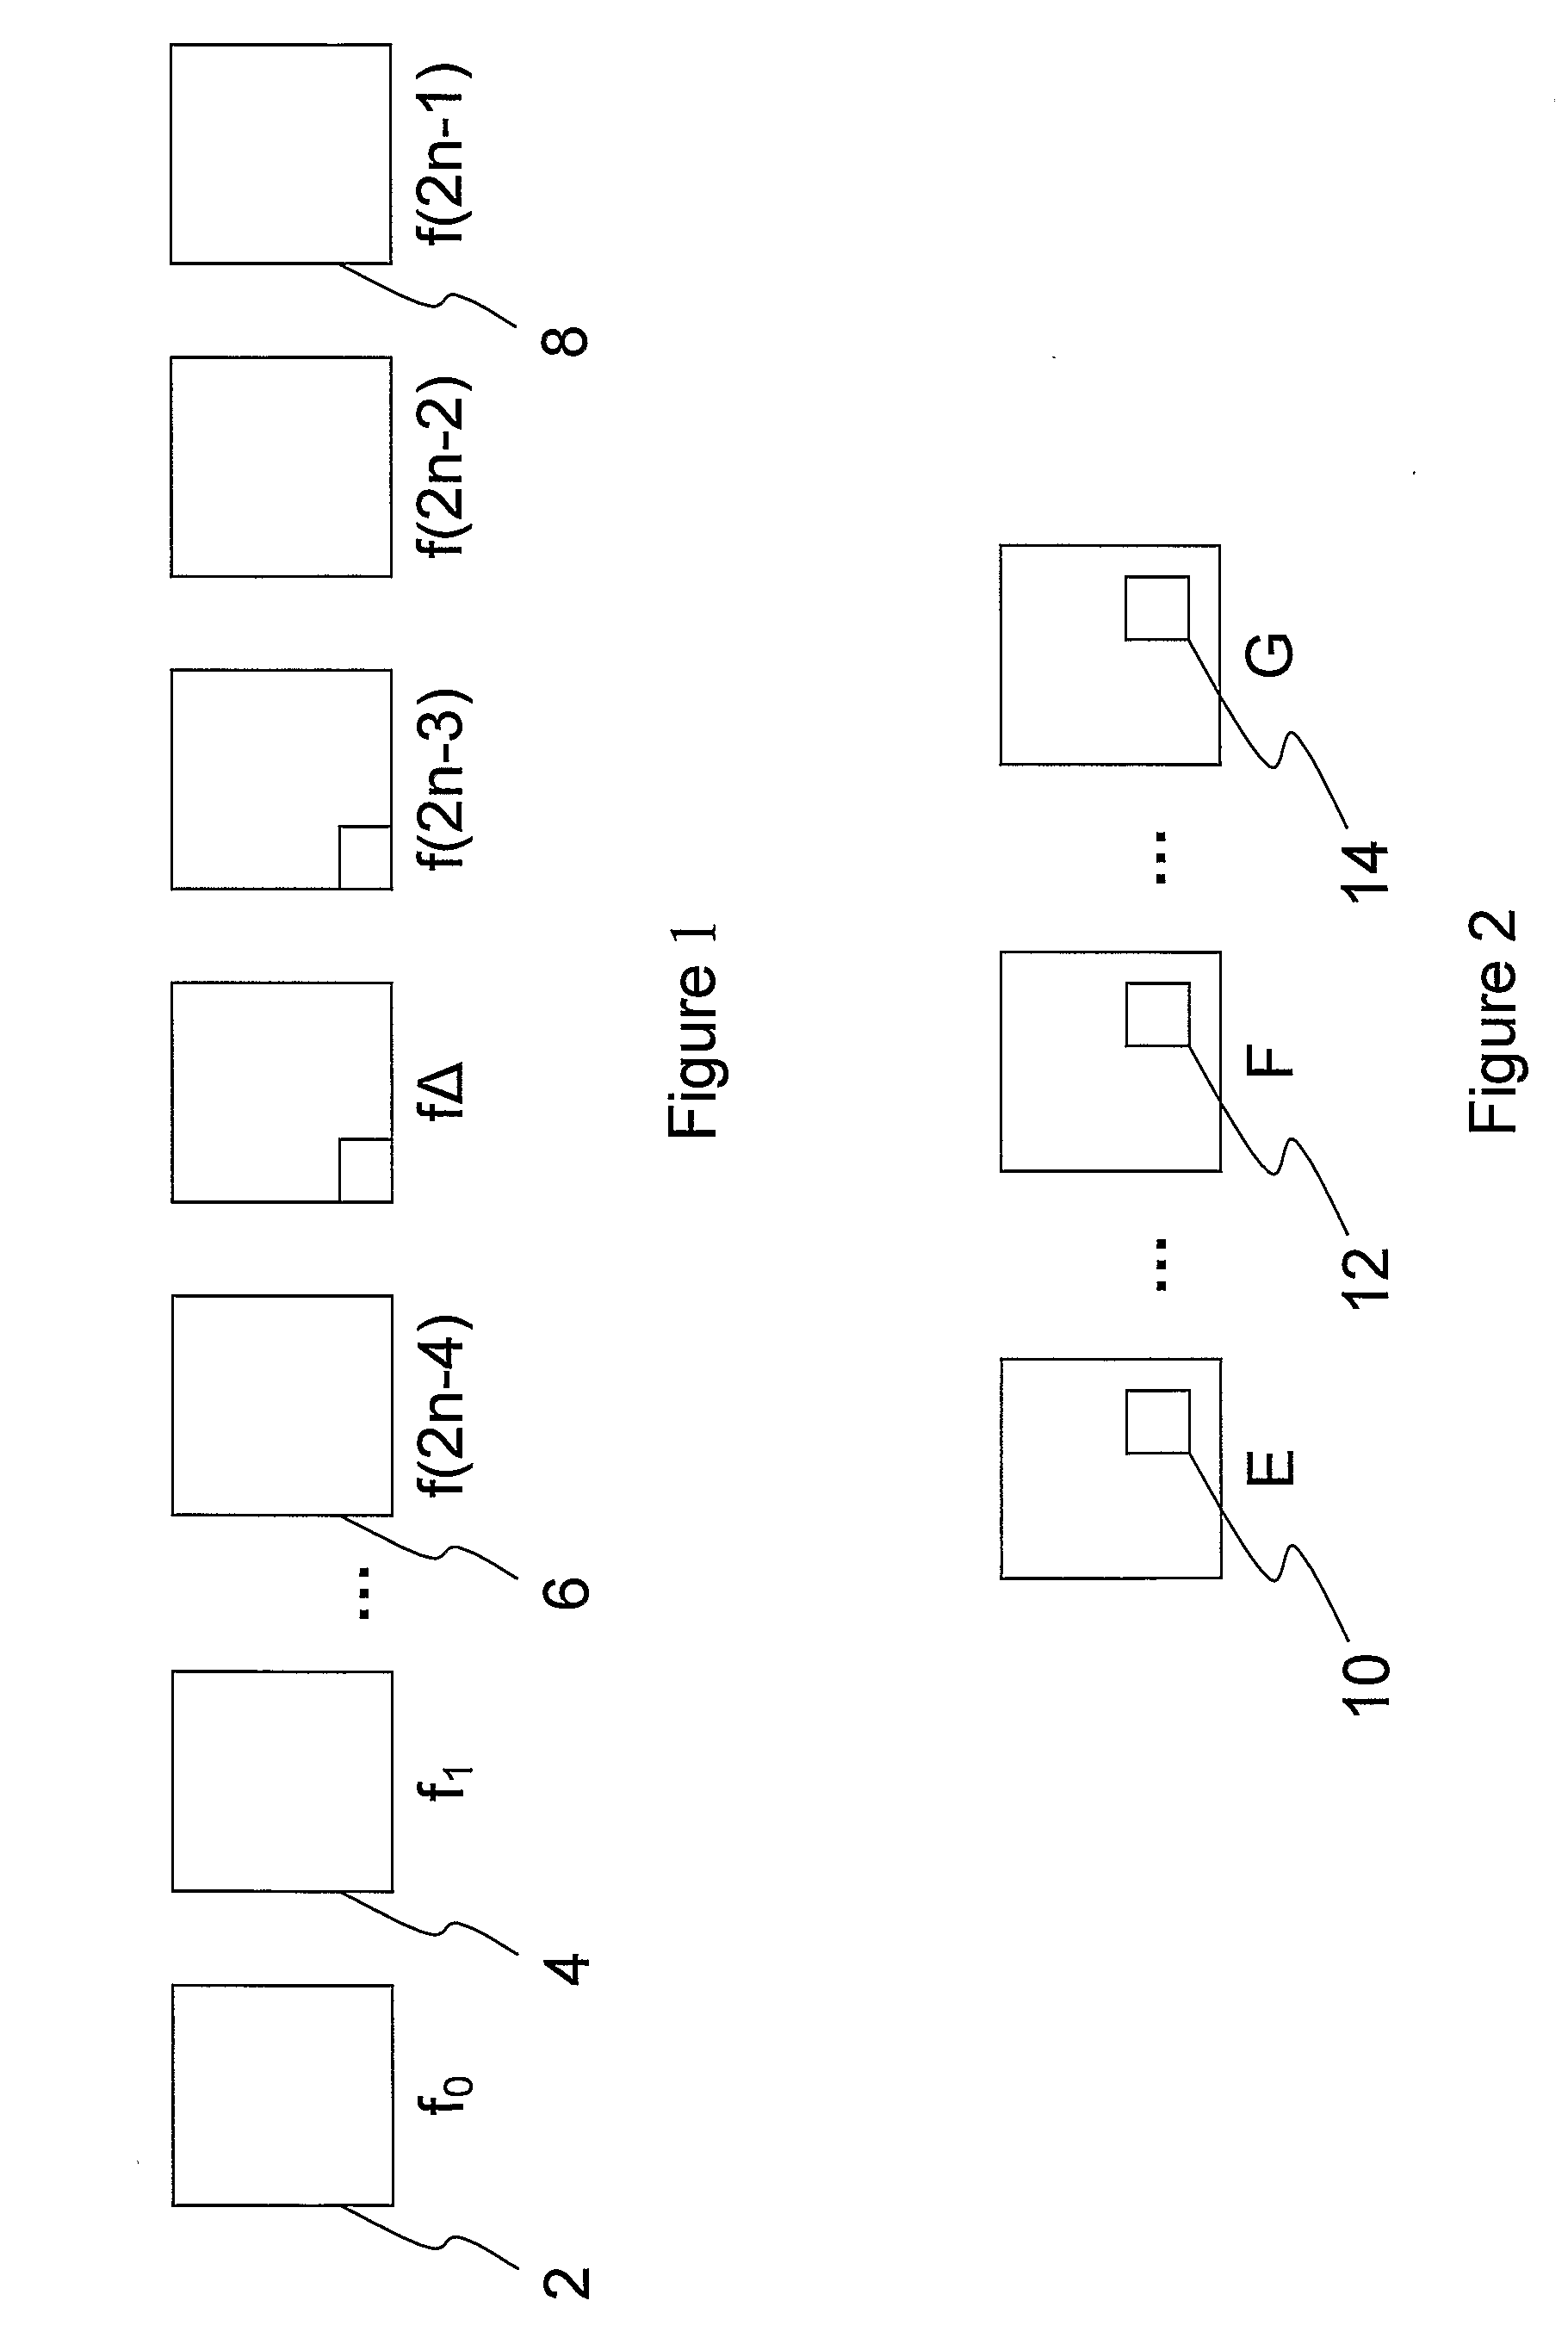 Method of compressing video data and a media player for implementing the method